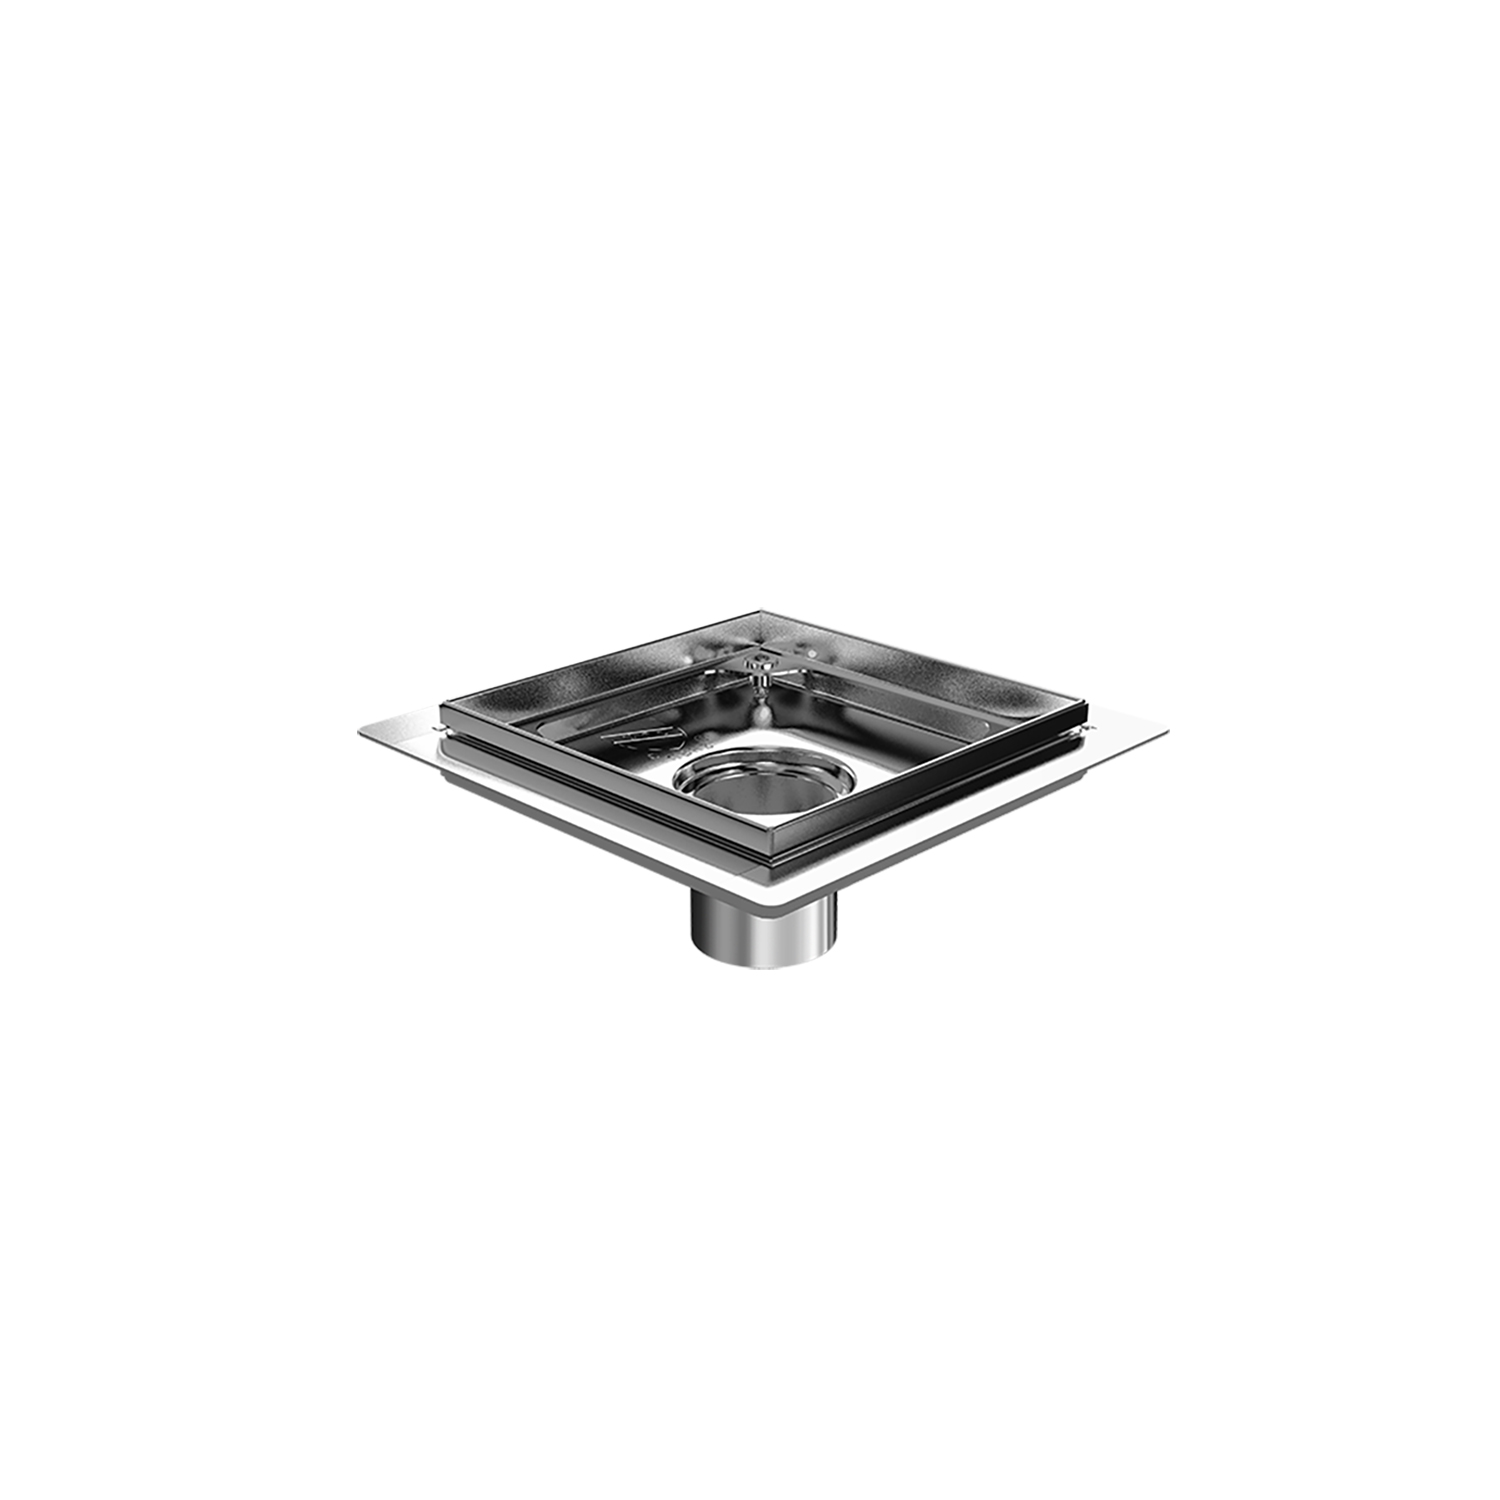 Square stainless steel grutter rough-in 8